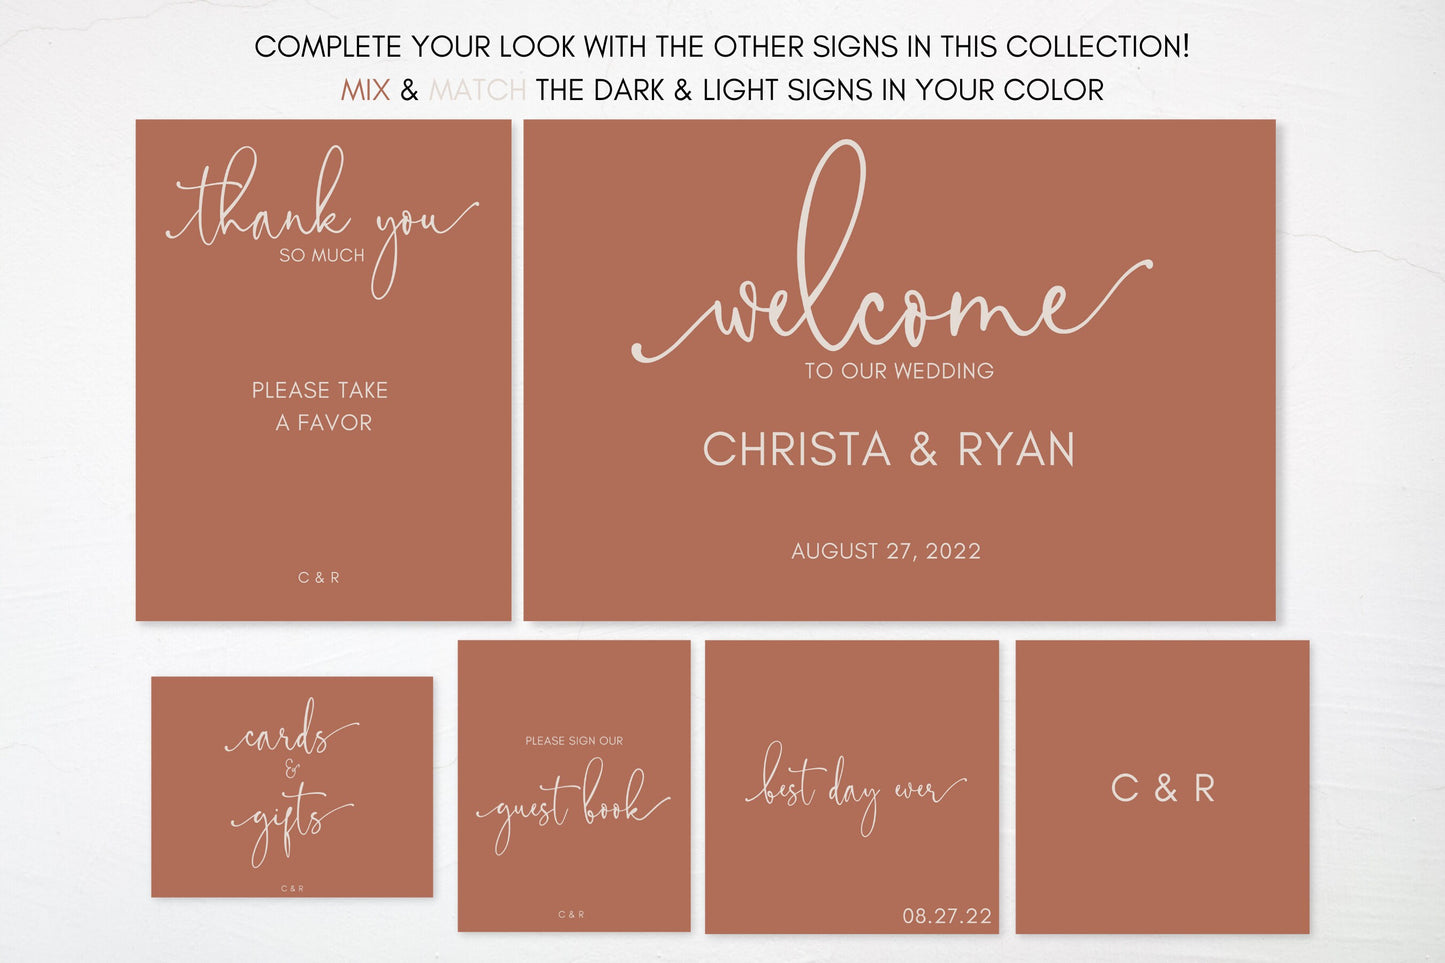 Simple Terracotta Rust Wedding Welcome Board Sign | Welcome to Our Wedding Sign